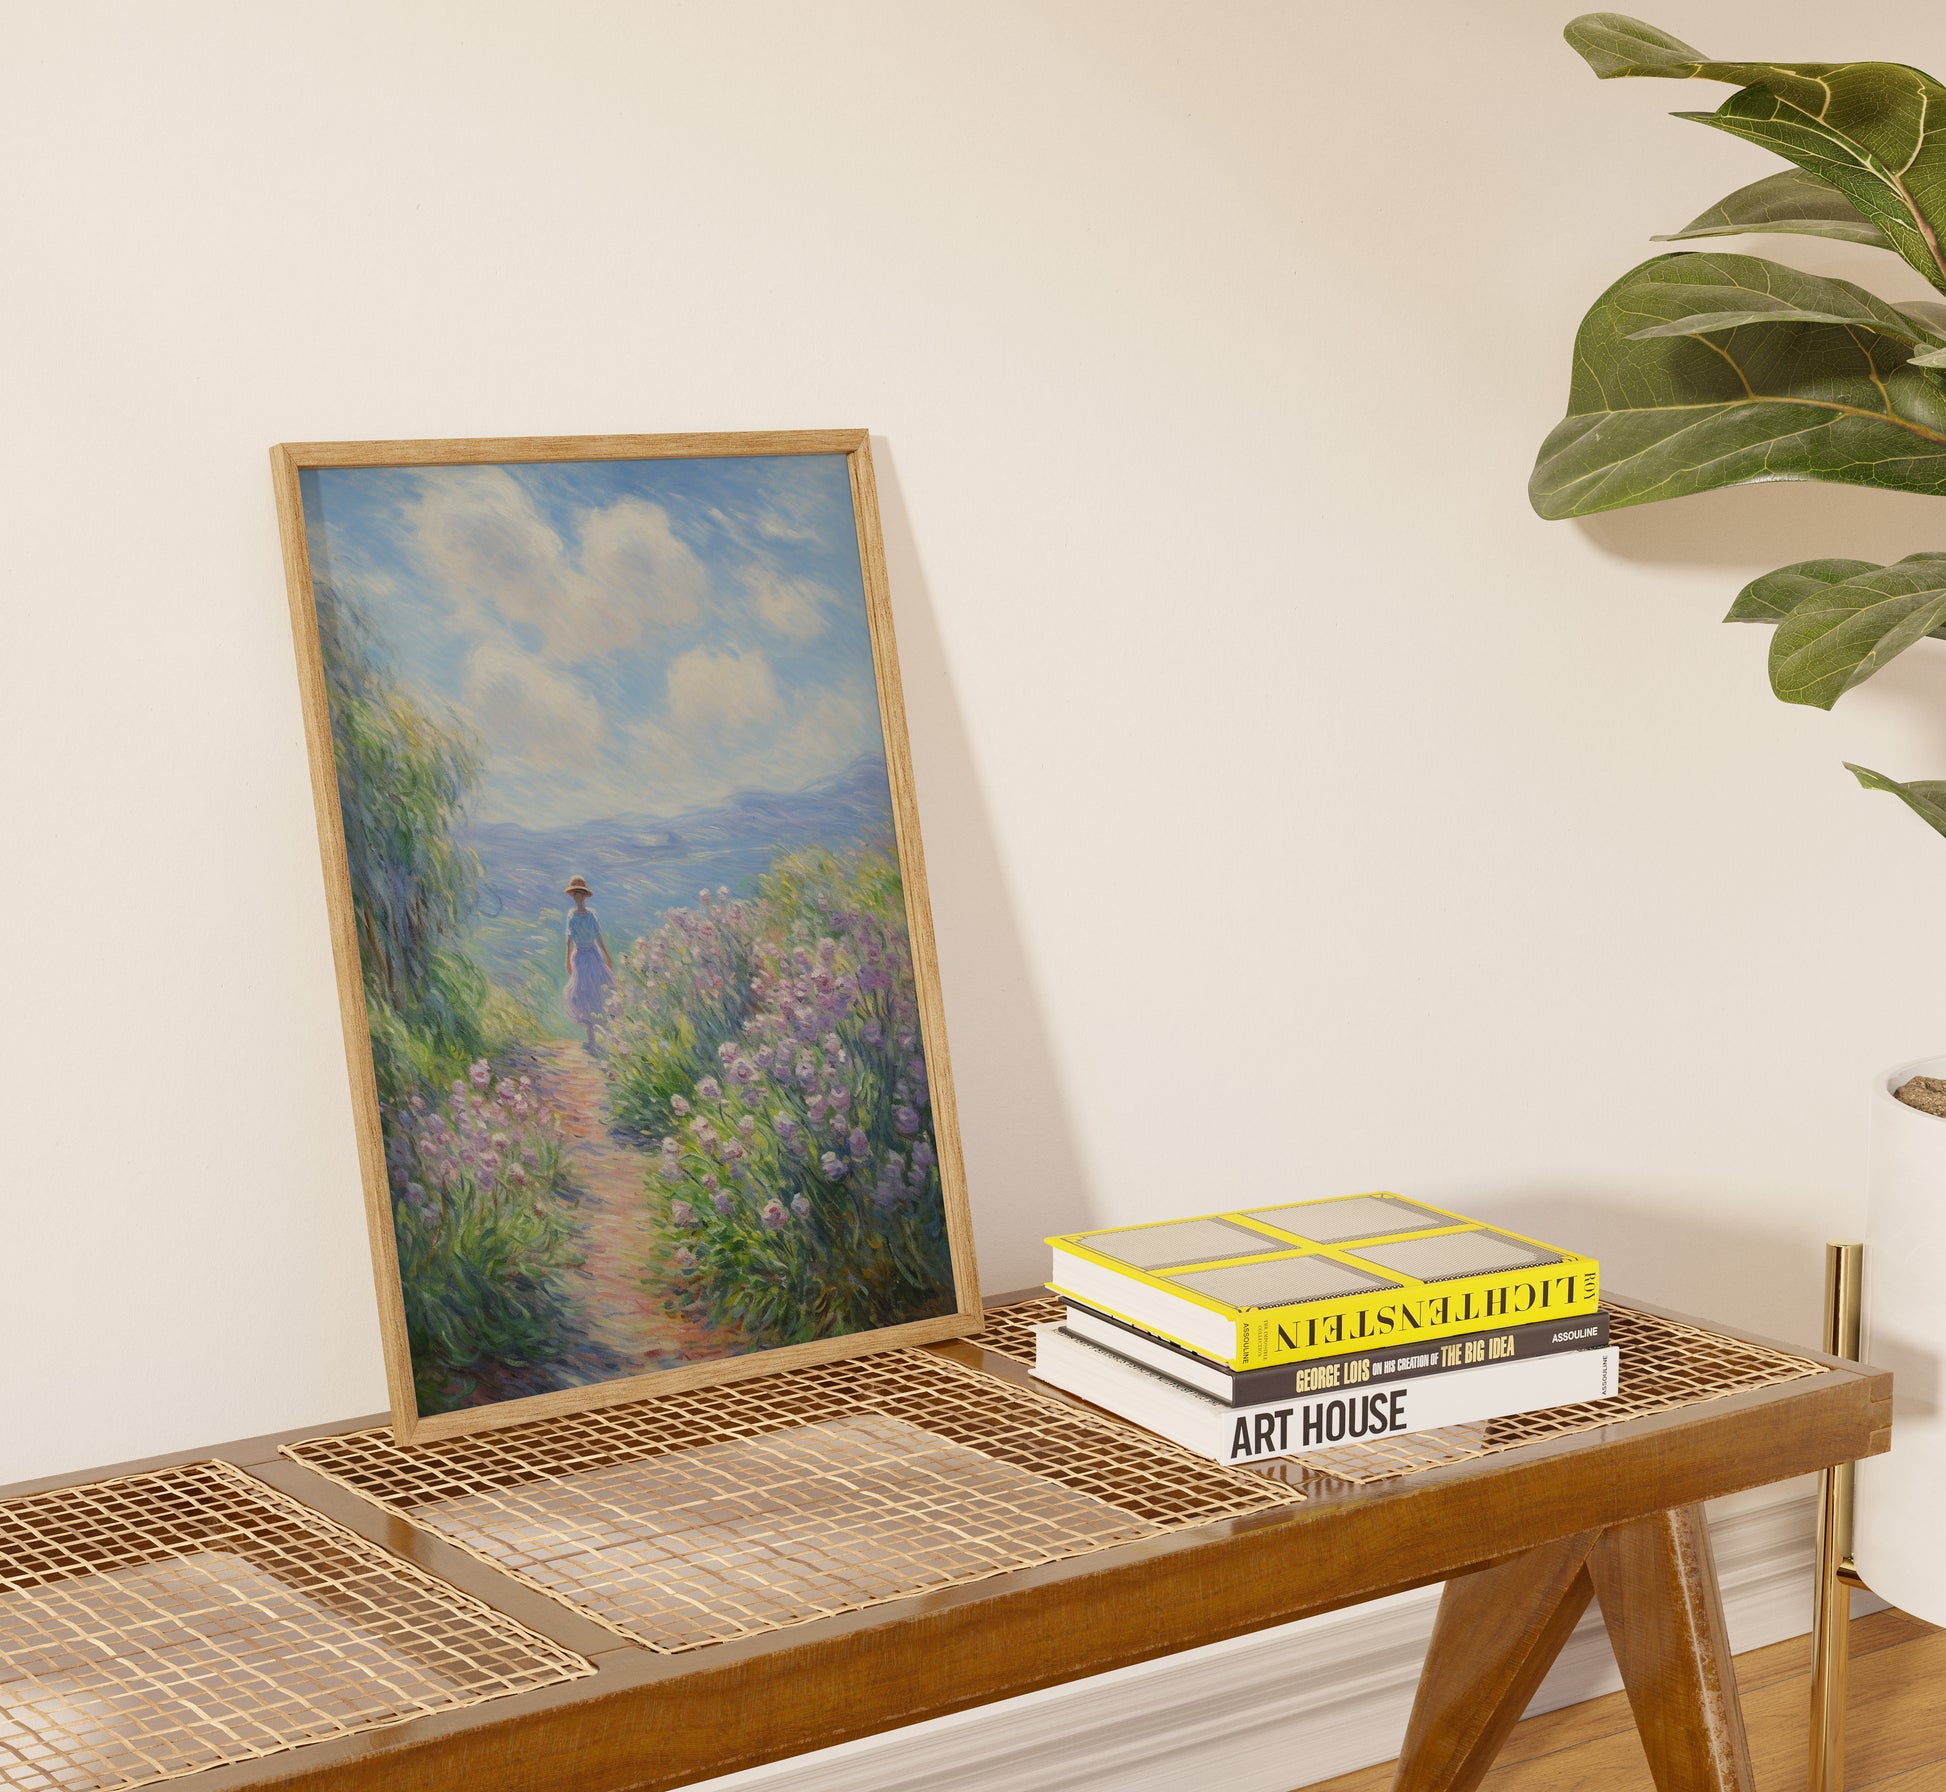 A framed painting of a garden path with books on a table beside it.